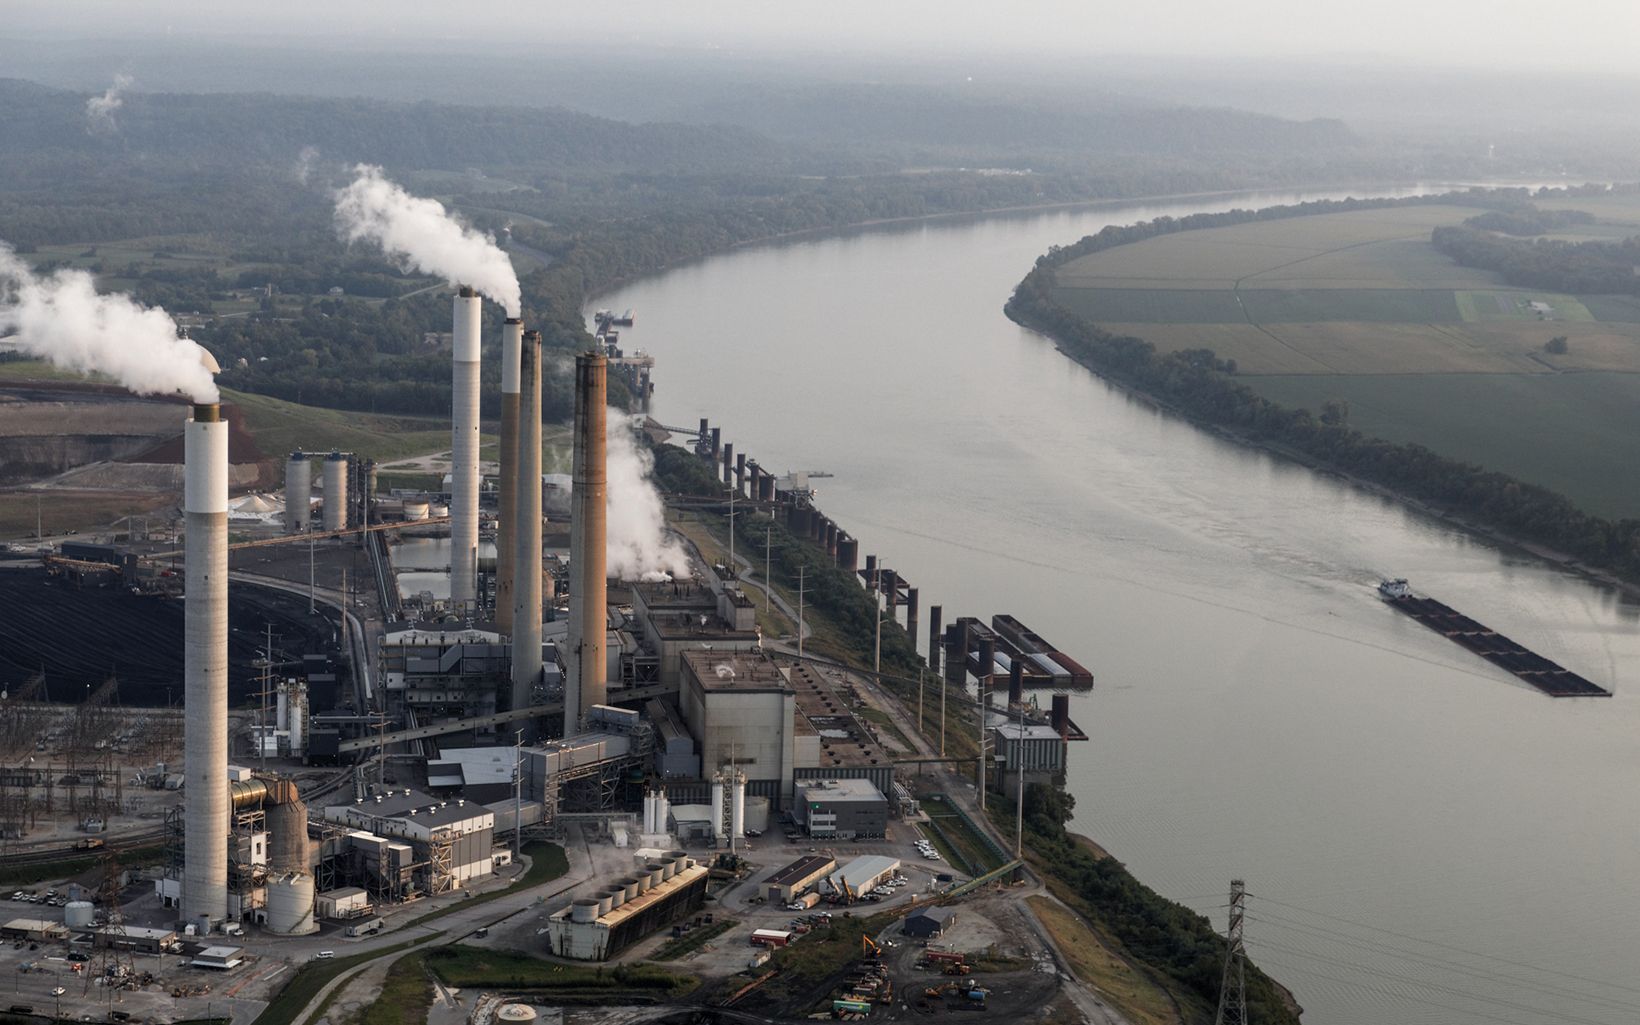 Mill Creek Coal Power Plant in Louisville. Louisville is located in the Ohio River Valley, and the geography causes polluted air from industrial centers to the north and west to linger over the city, resulting in local air quality issues.